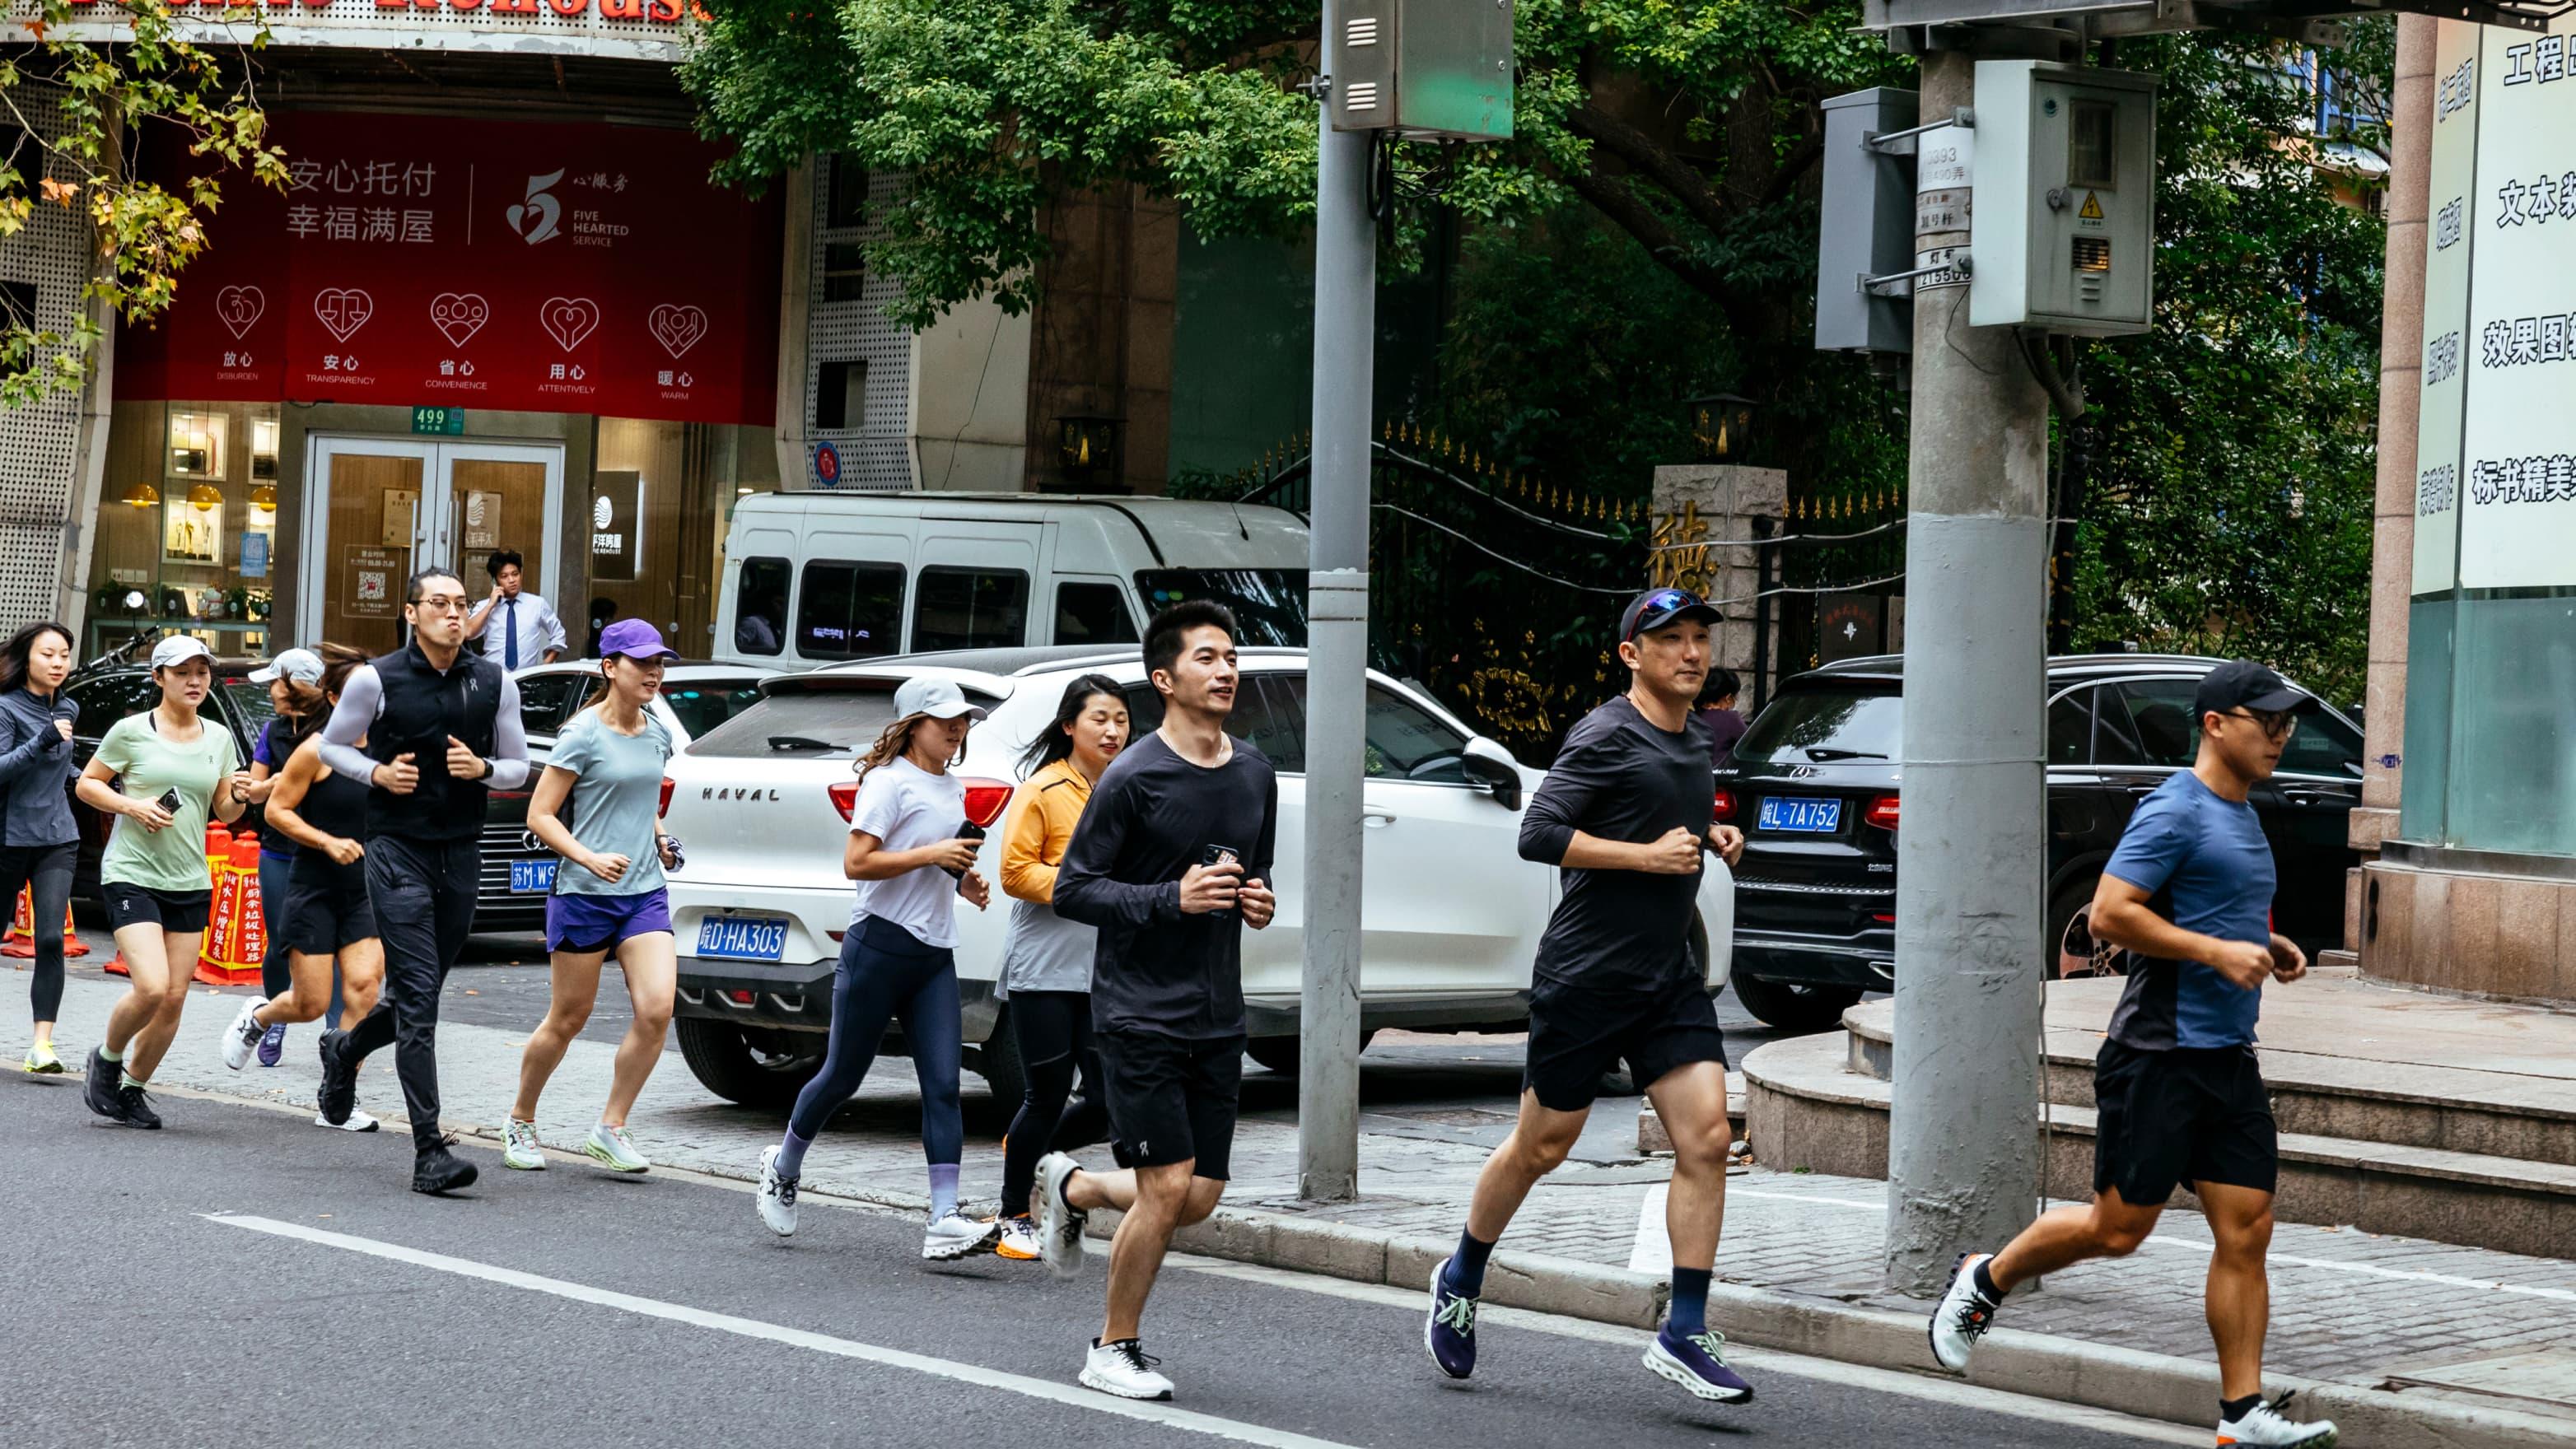 A group of athletes running through the streets of the city